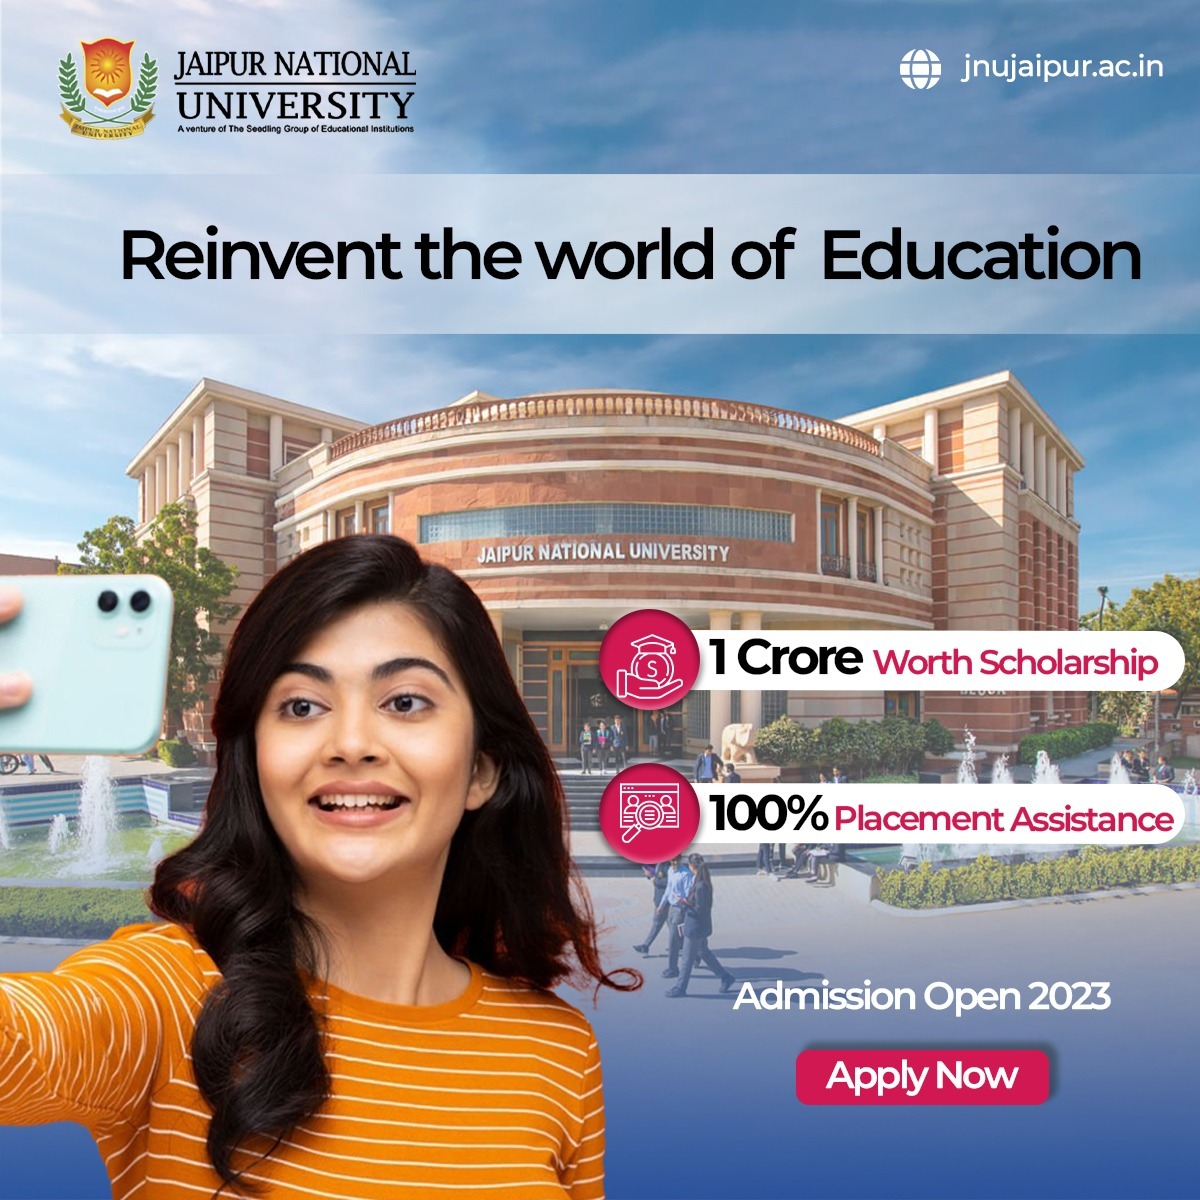 A future of golden opportunities awaits you at #JaipurNationalUniversity. Apply for admissions and get financial assistance to aid your higher education journey as well as receive 100% placement assistance.

#Scholarships #HighereducationScholarship #EducationScholarship